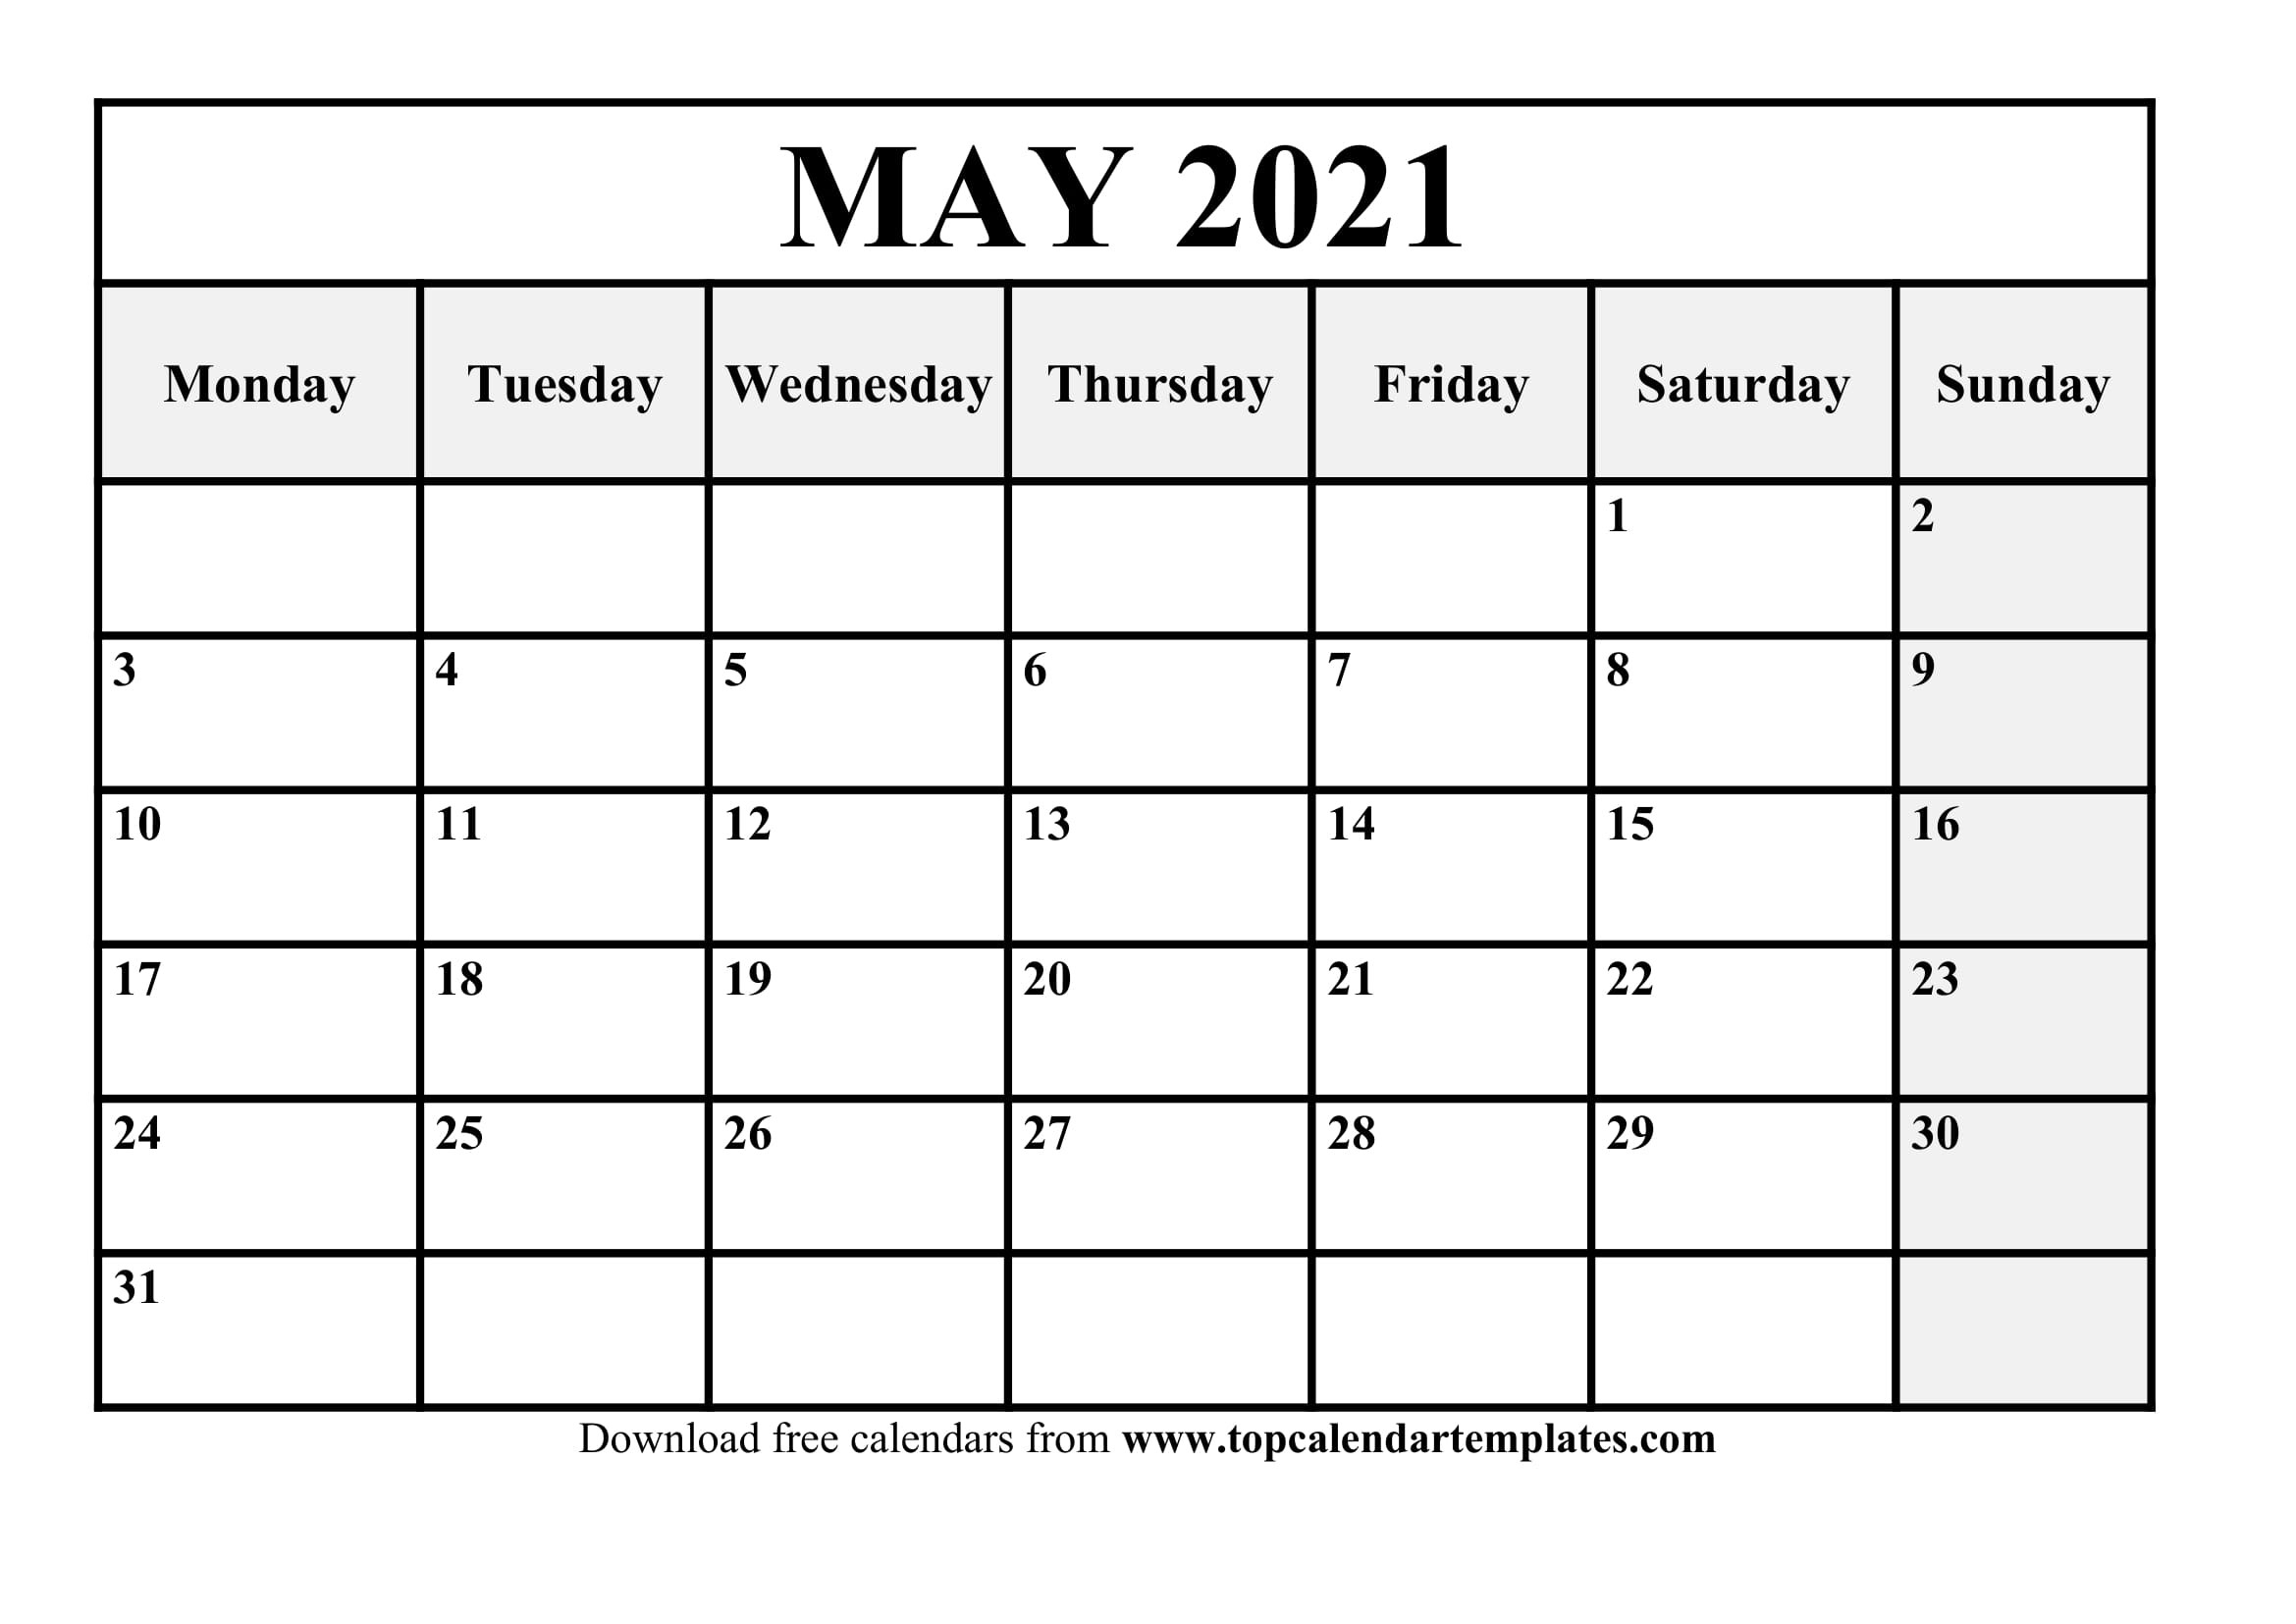 Free May 2021 Printable Calendar In Editable Format-Editable Calendars By Month 2021